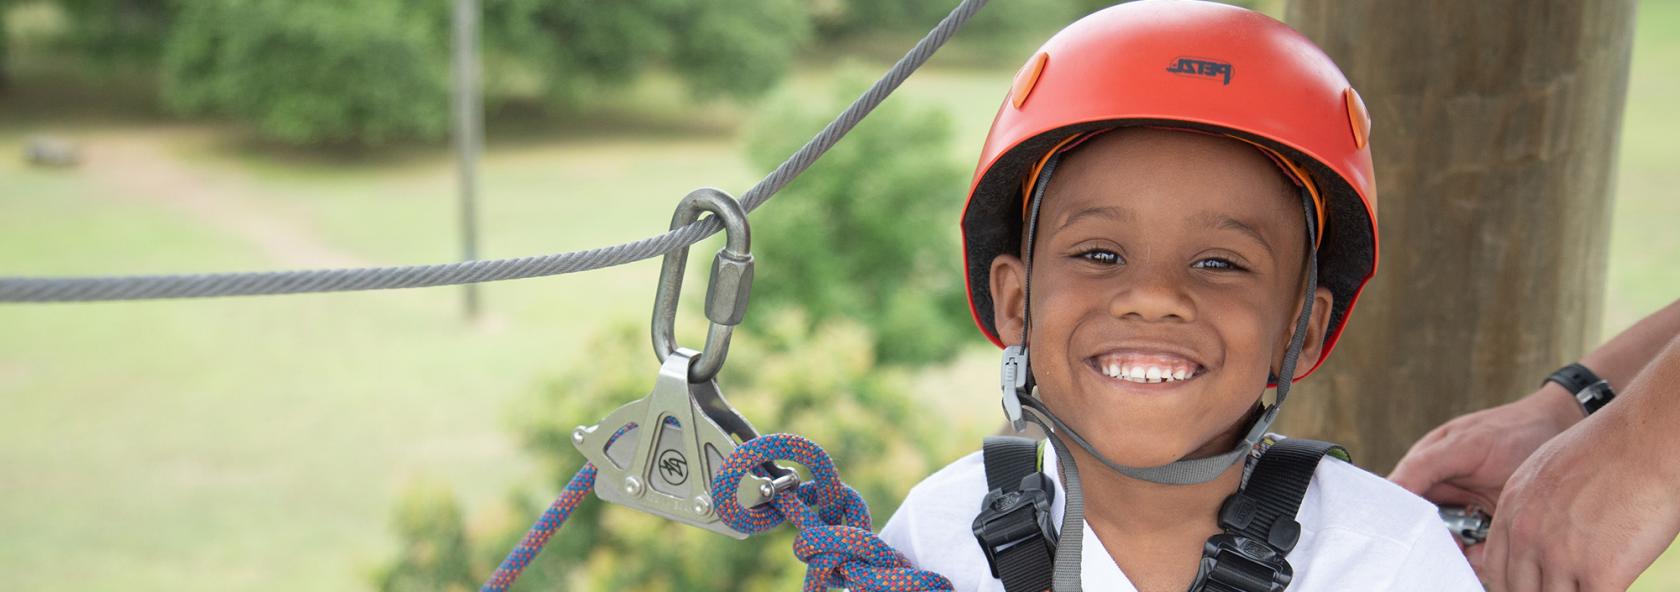 Smiling boy on ropes course